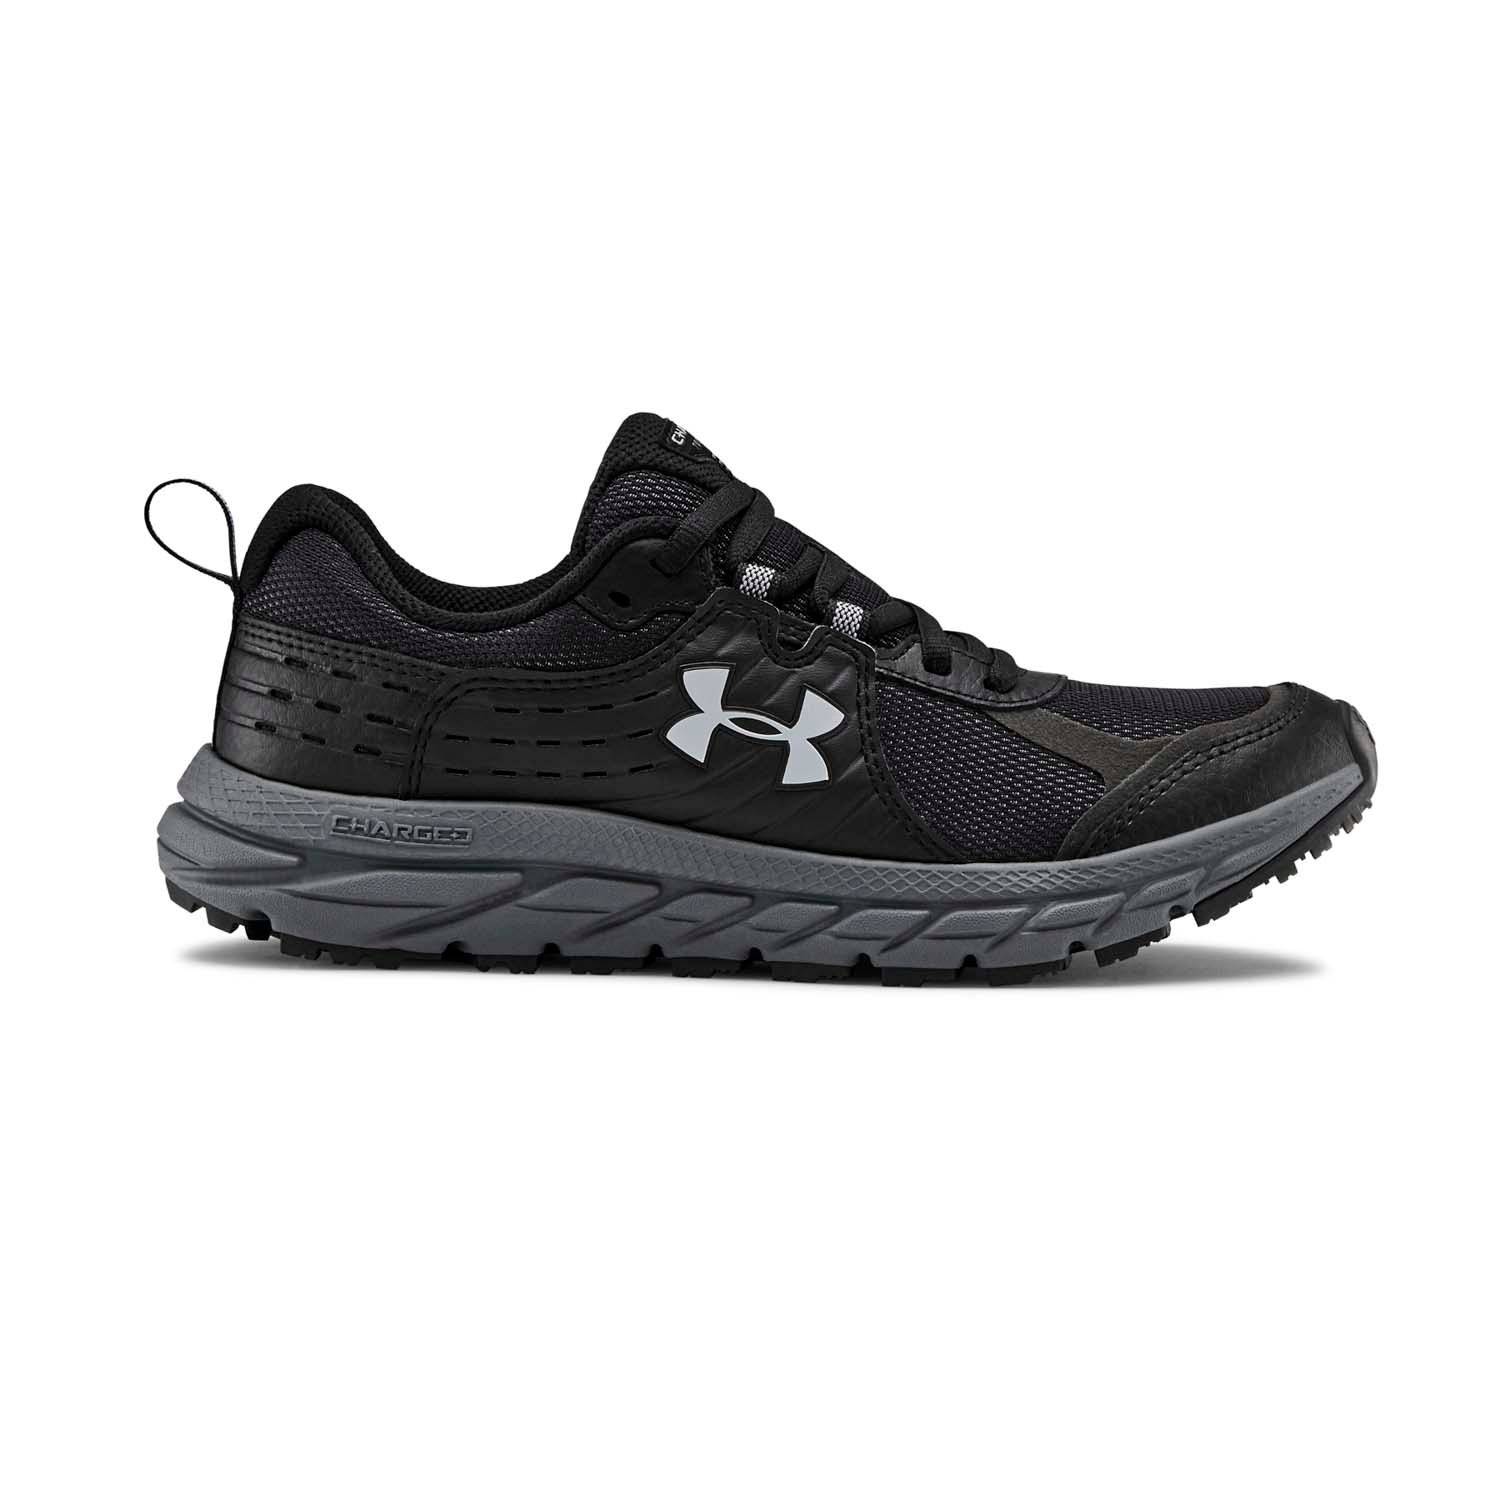 Under Armour Women’s Charged Toccoa 2 Hiking Shoe